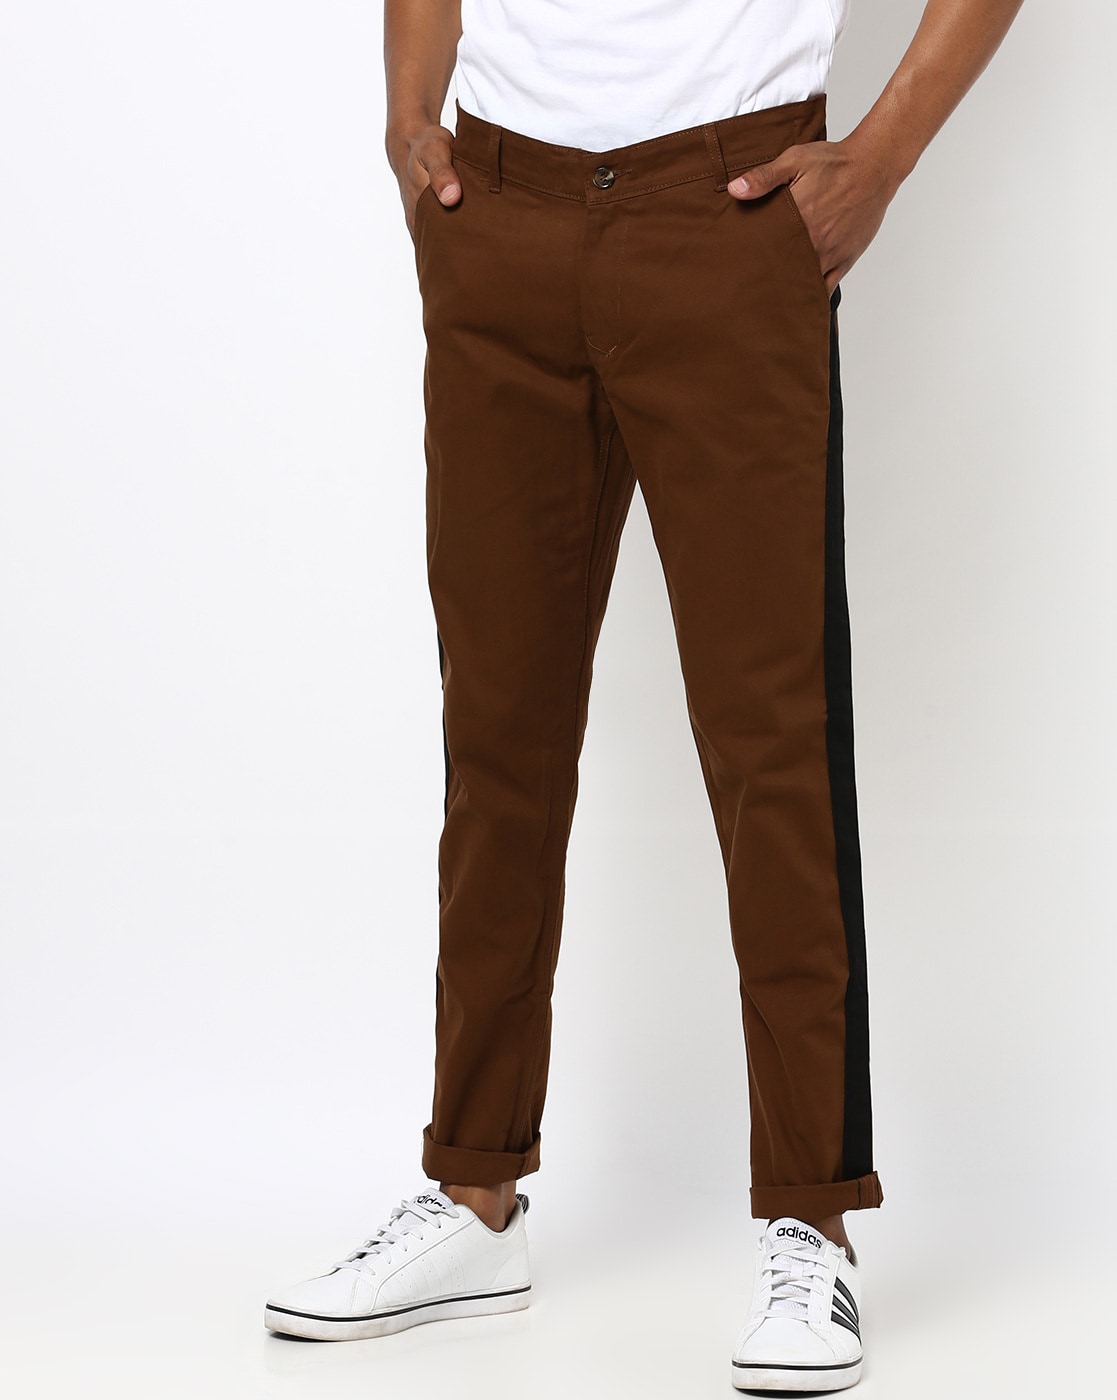 Southloom Jaipur Cotton Solid Brown Pants for Men – Southloom Handmade and  Organics